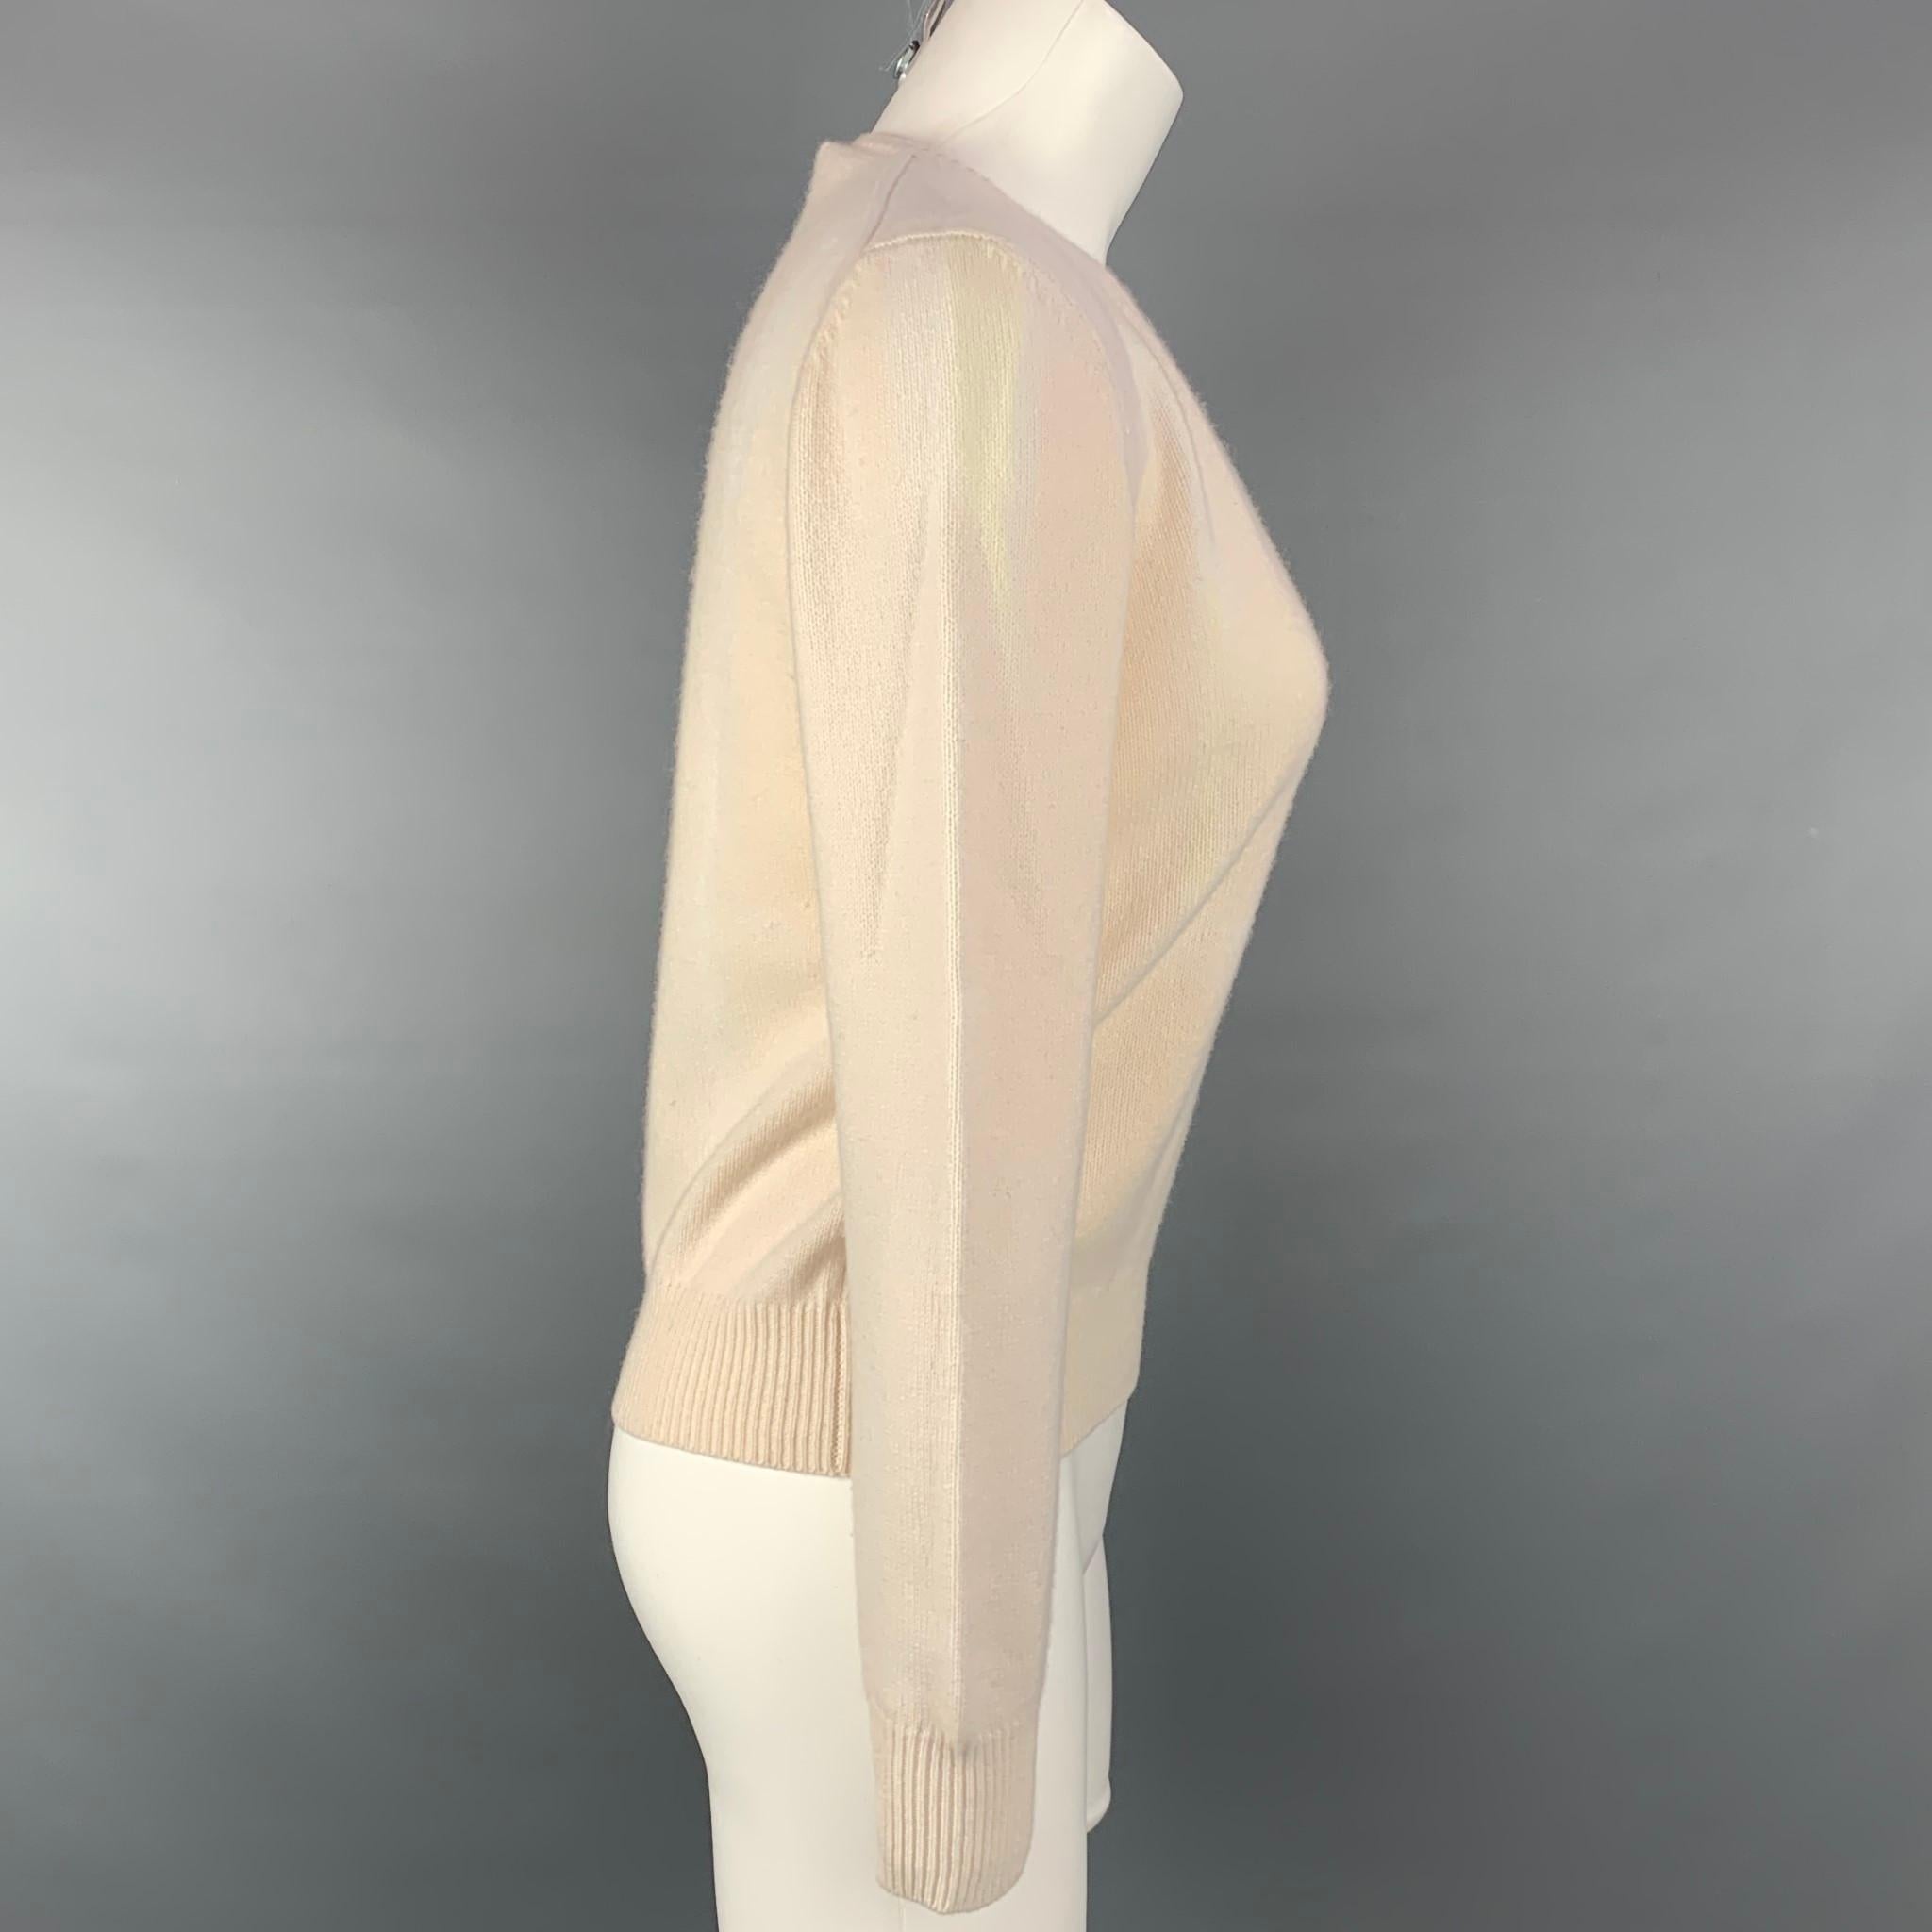 PRADA pullover comes in a cream wool / cashmere featuring a ribbed hem and a v-neck. Made in Italy. 

Good Pre-Owned Condition. Light discoloration at front of sweater.
Marked: 42

Measurements:

Shoulder: 17 in.
Bust: 38 in.
Sleeve: 24.5